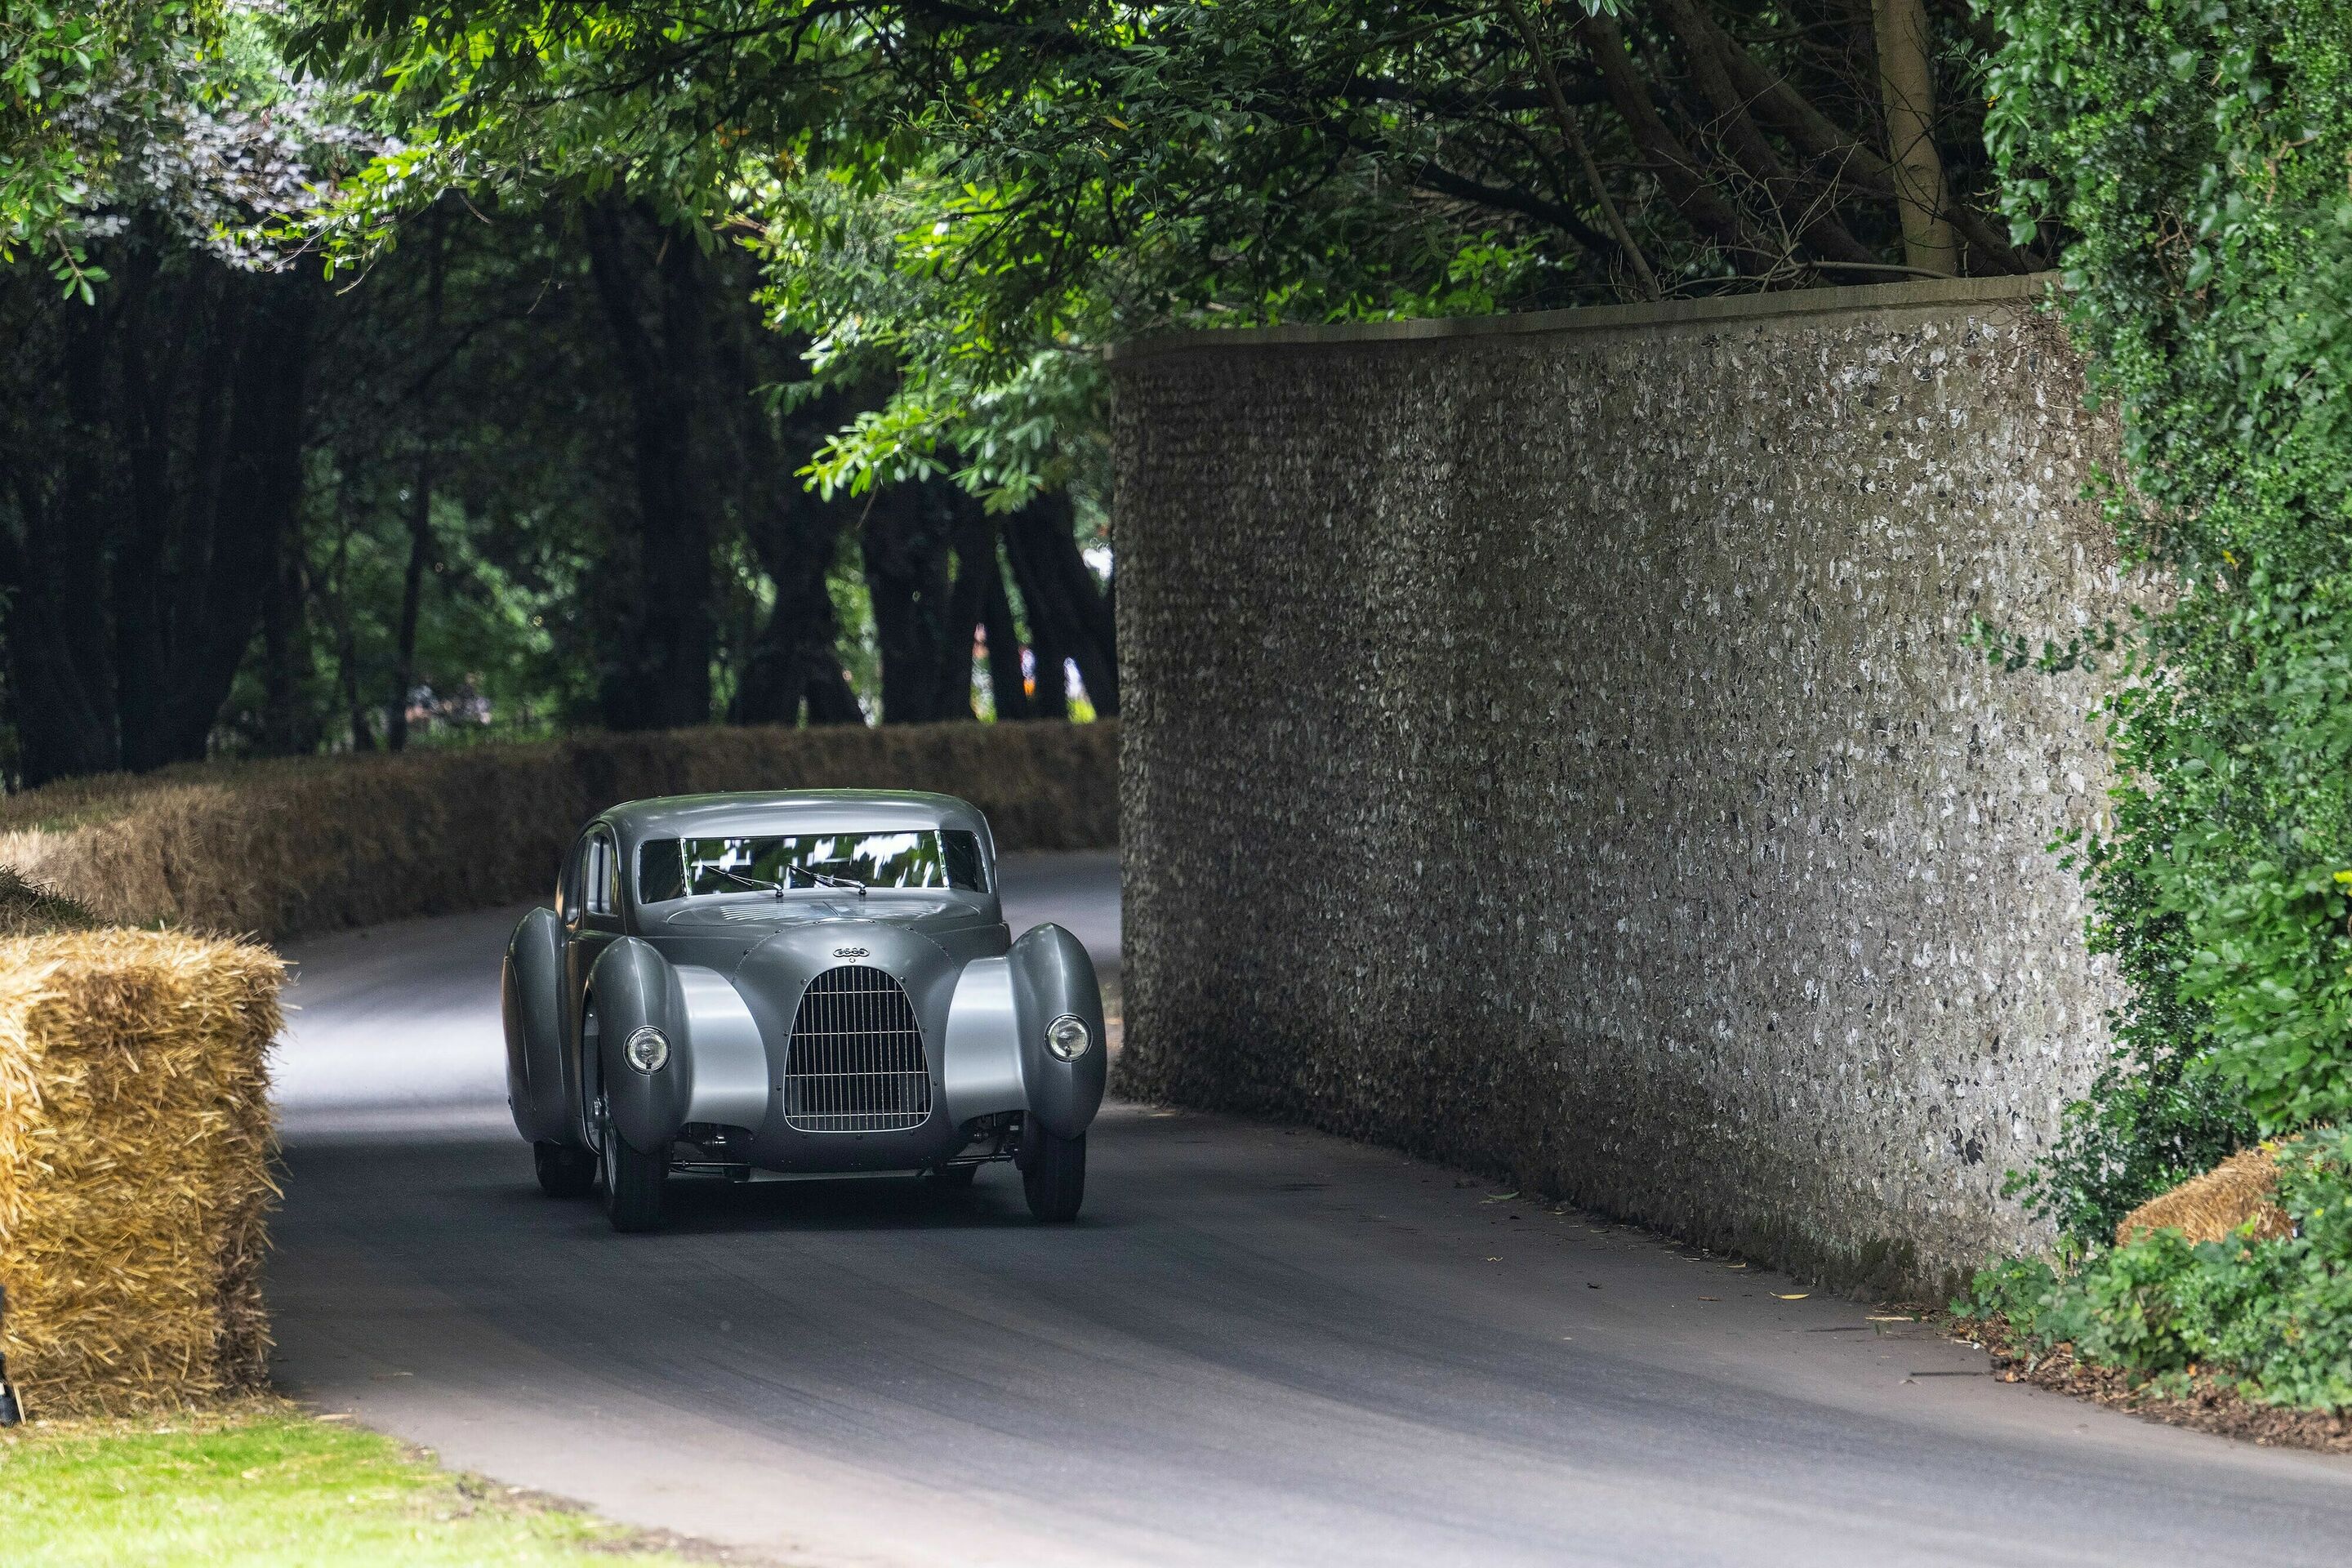 Audi Tradition beim Goodwood Festival of Speed 2024